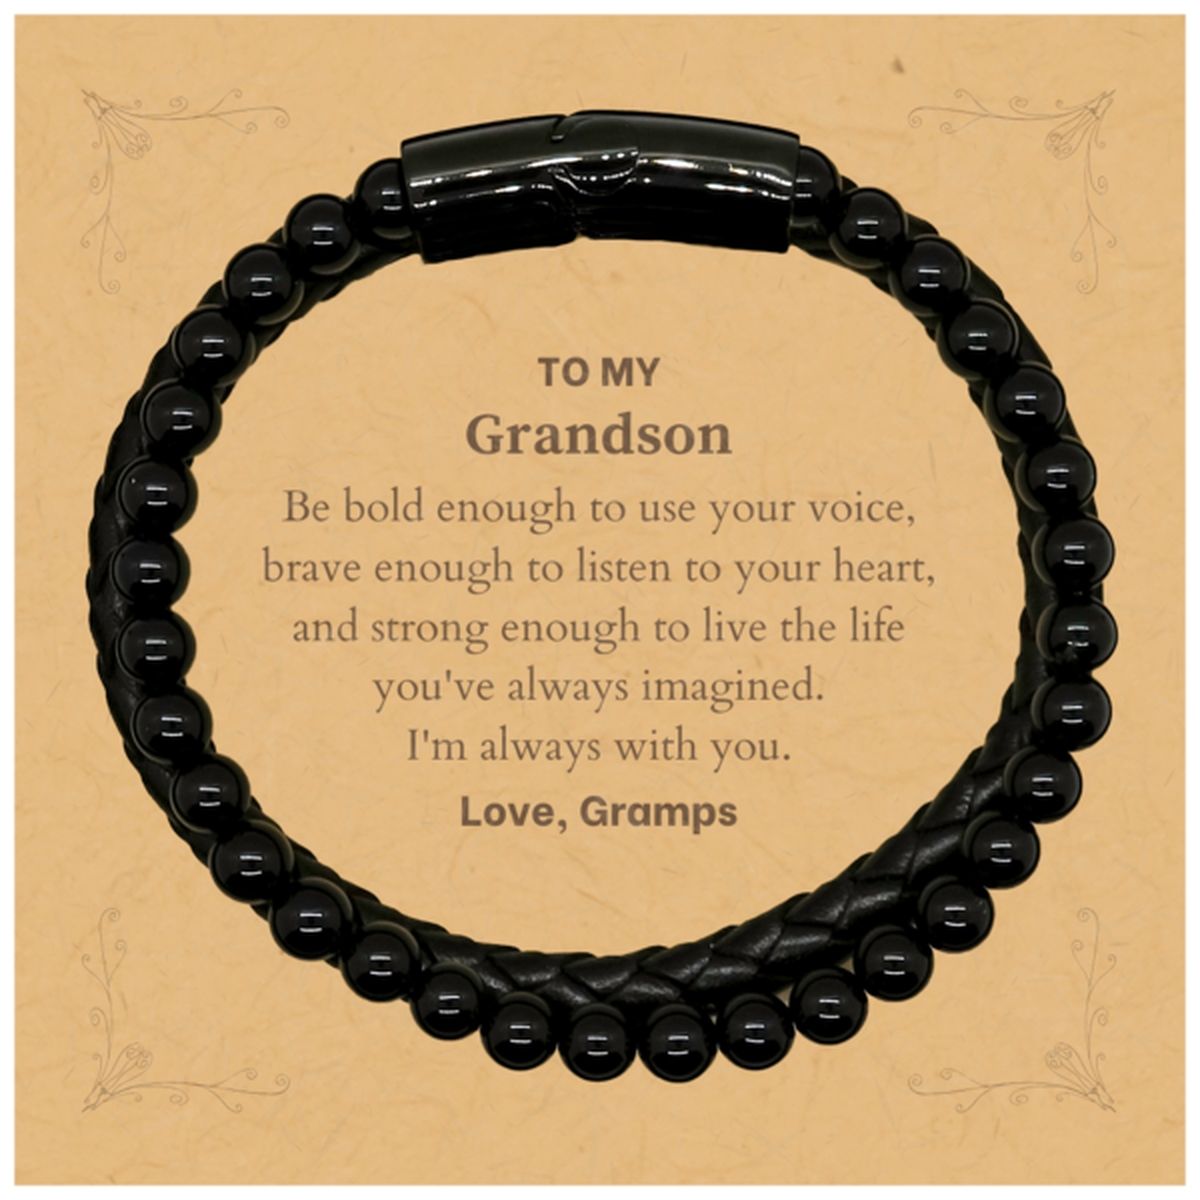 Keepsake Grandson Stone Leather Bracelets Gift Idea Graduation Christmas Birthday Grandson from Gramps, Grandson Be bold enough to use your voice, brave enough to listen to your heart. Love, Gramps